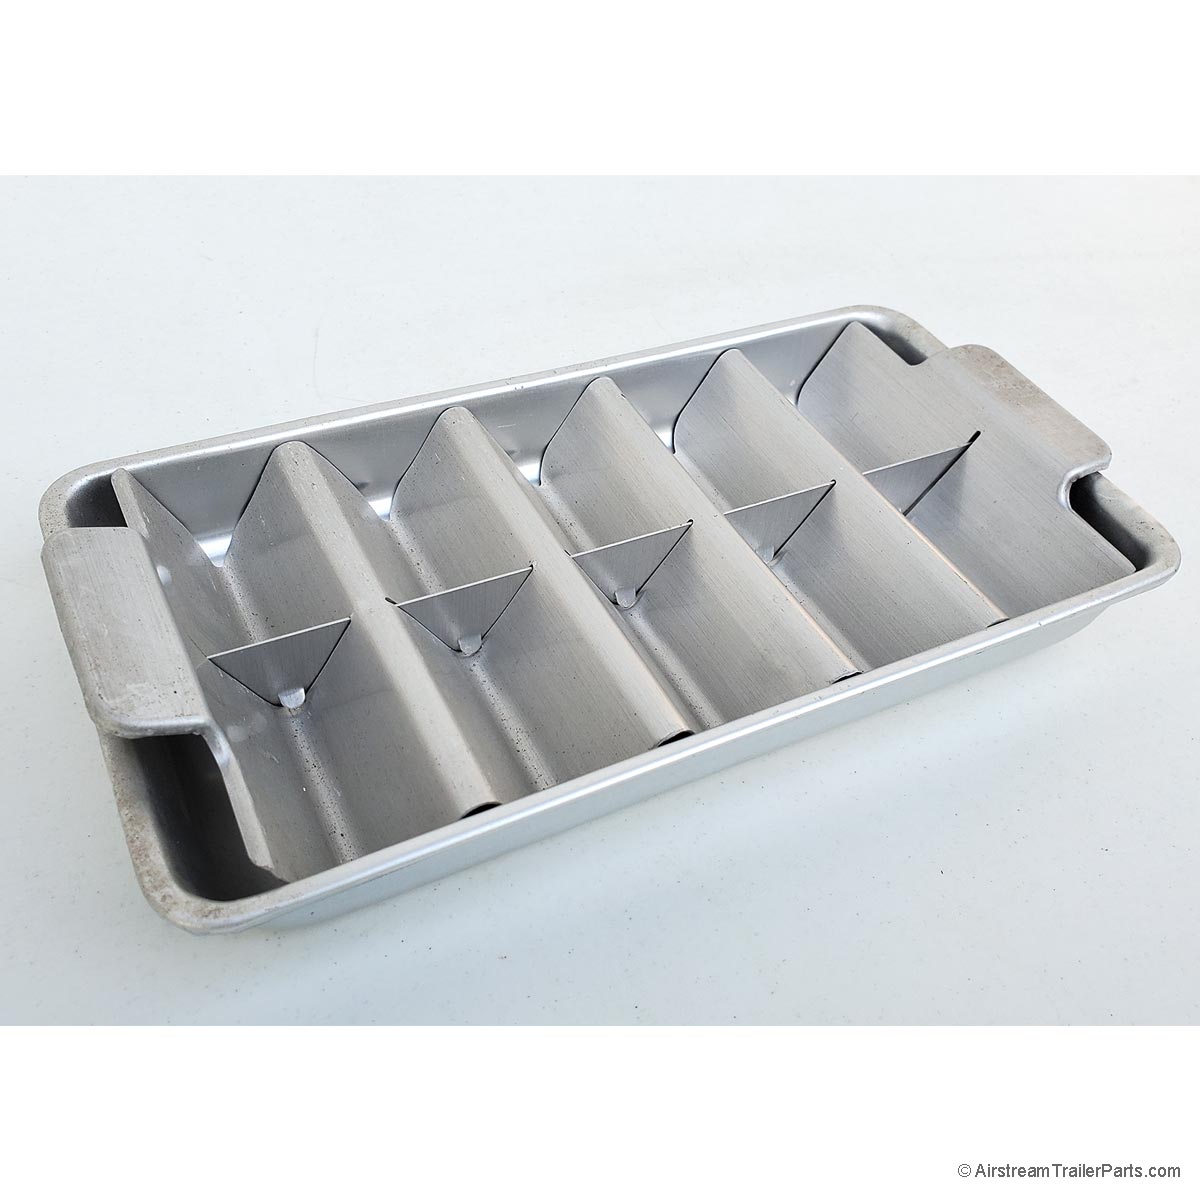 https://airstreamtrailerparts.com/wp-content/uploads/ice-cube-trays-cs7835.jpg